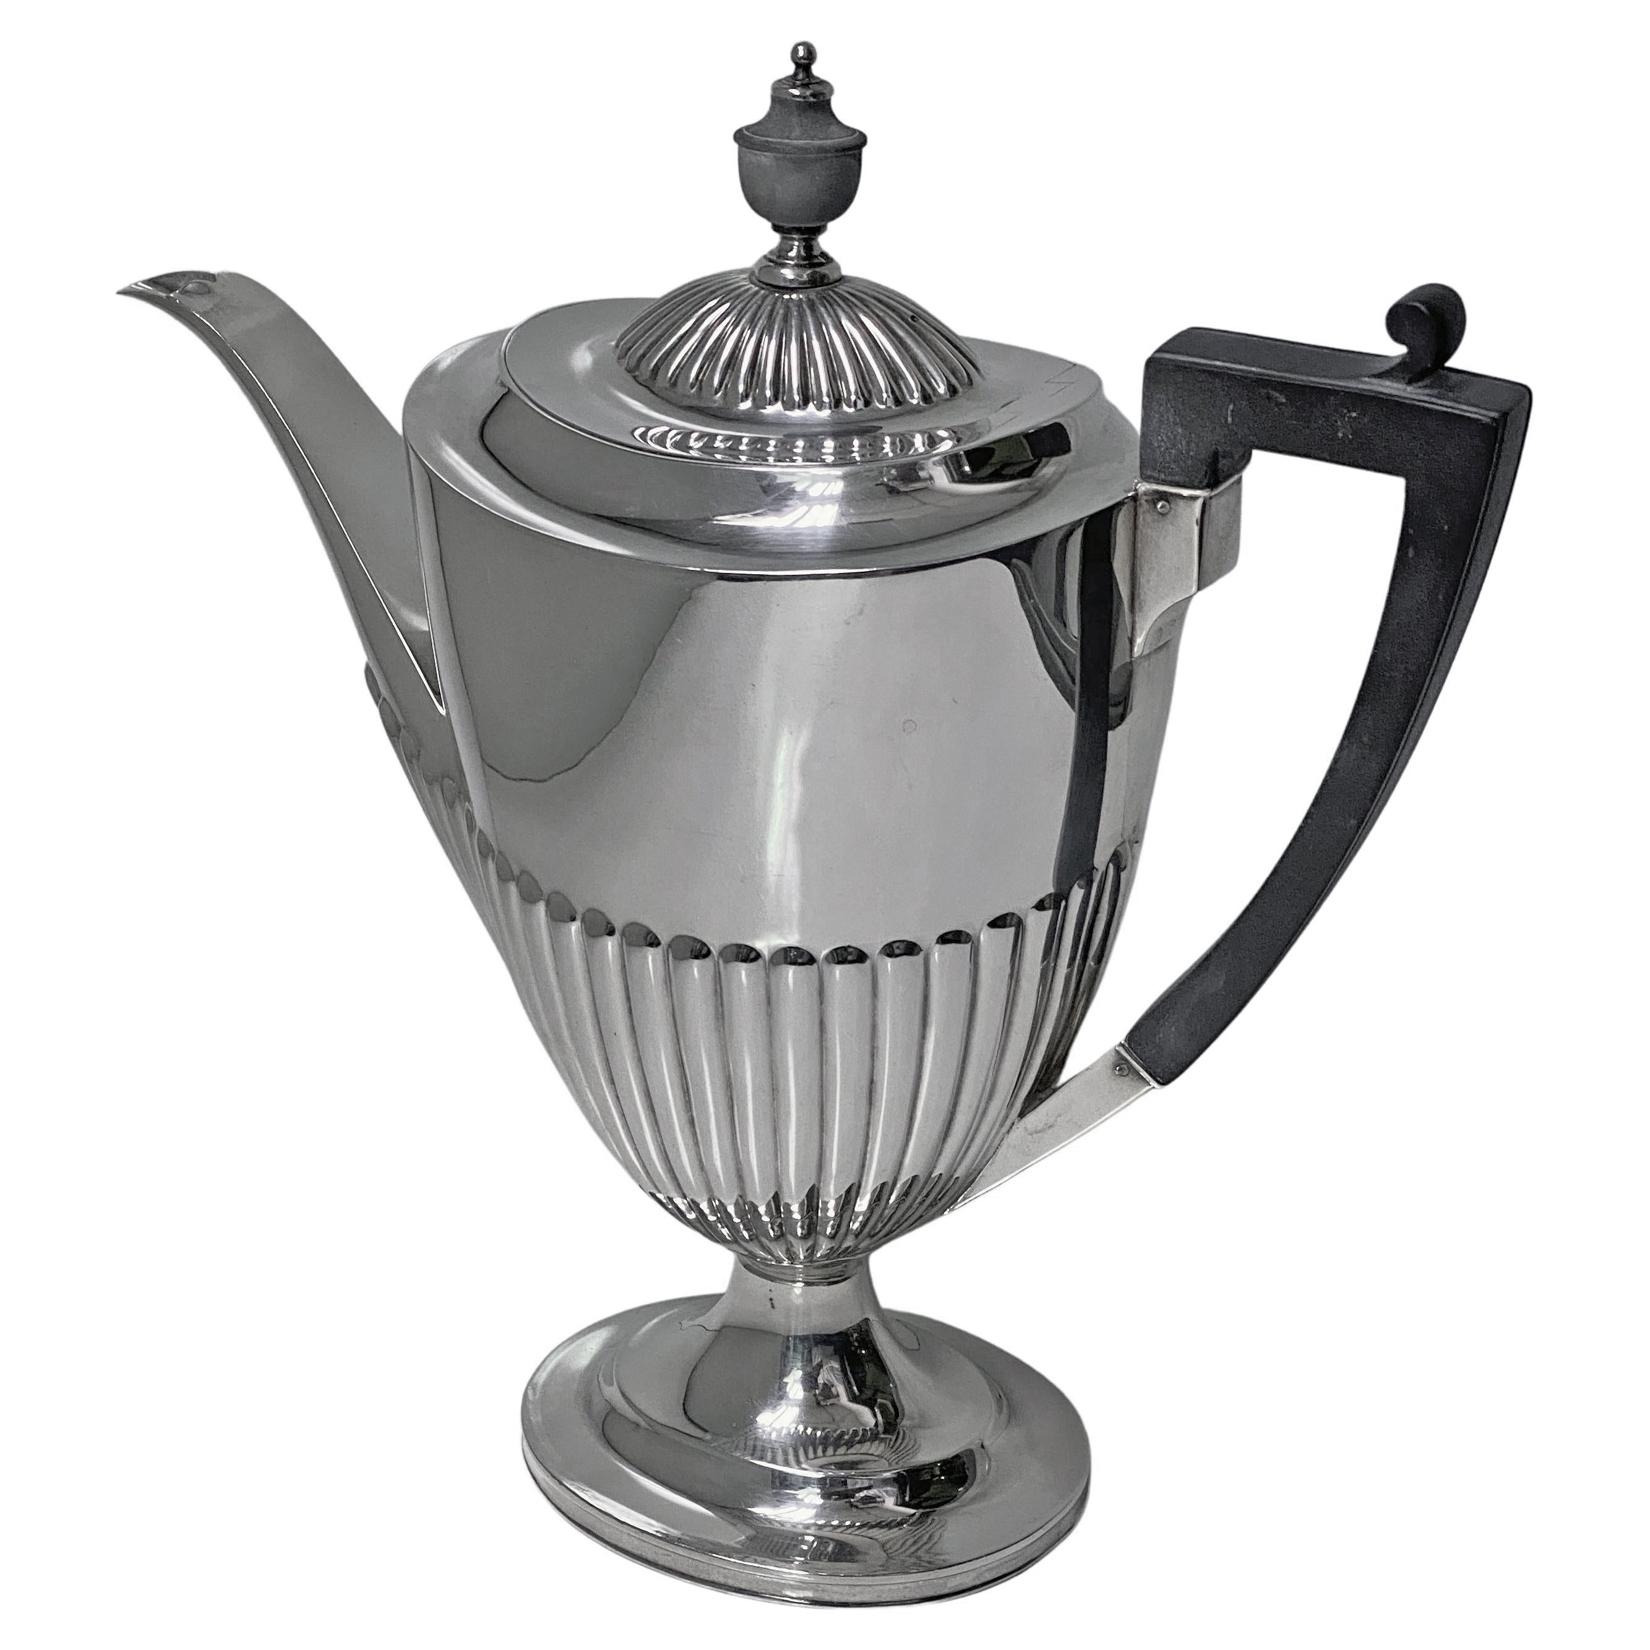 Antique Silver Coffee Pot, London 1908, Goldsmiths & Silversmiths Co. The Jug of Georgian style, on oval plain pedestal base, lower fluted vase shape body, upper body plain, hinged cover with mushroom fluted design, plain silver and wood finial,